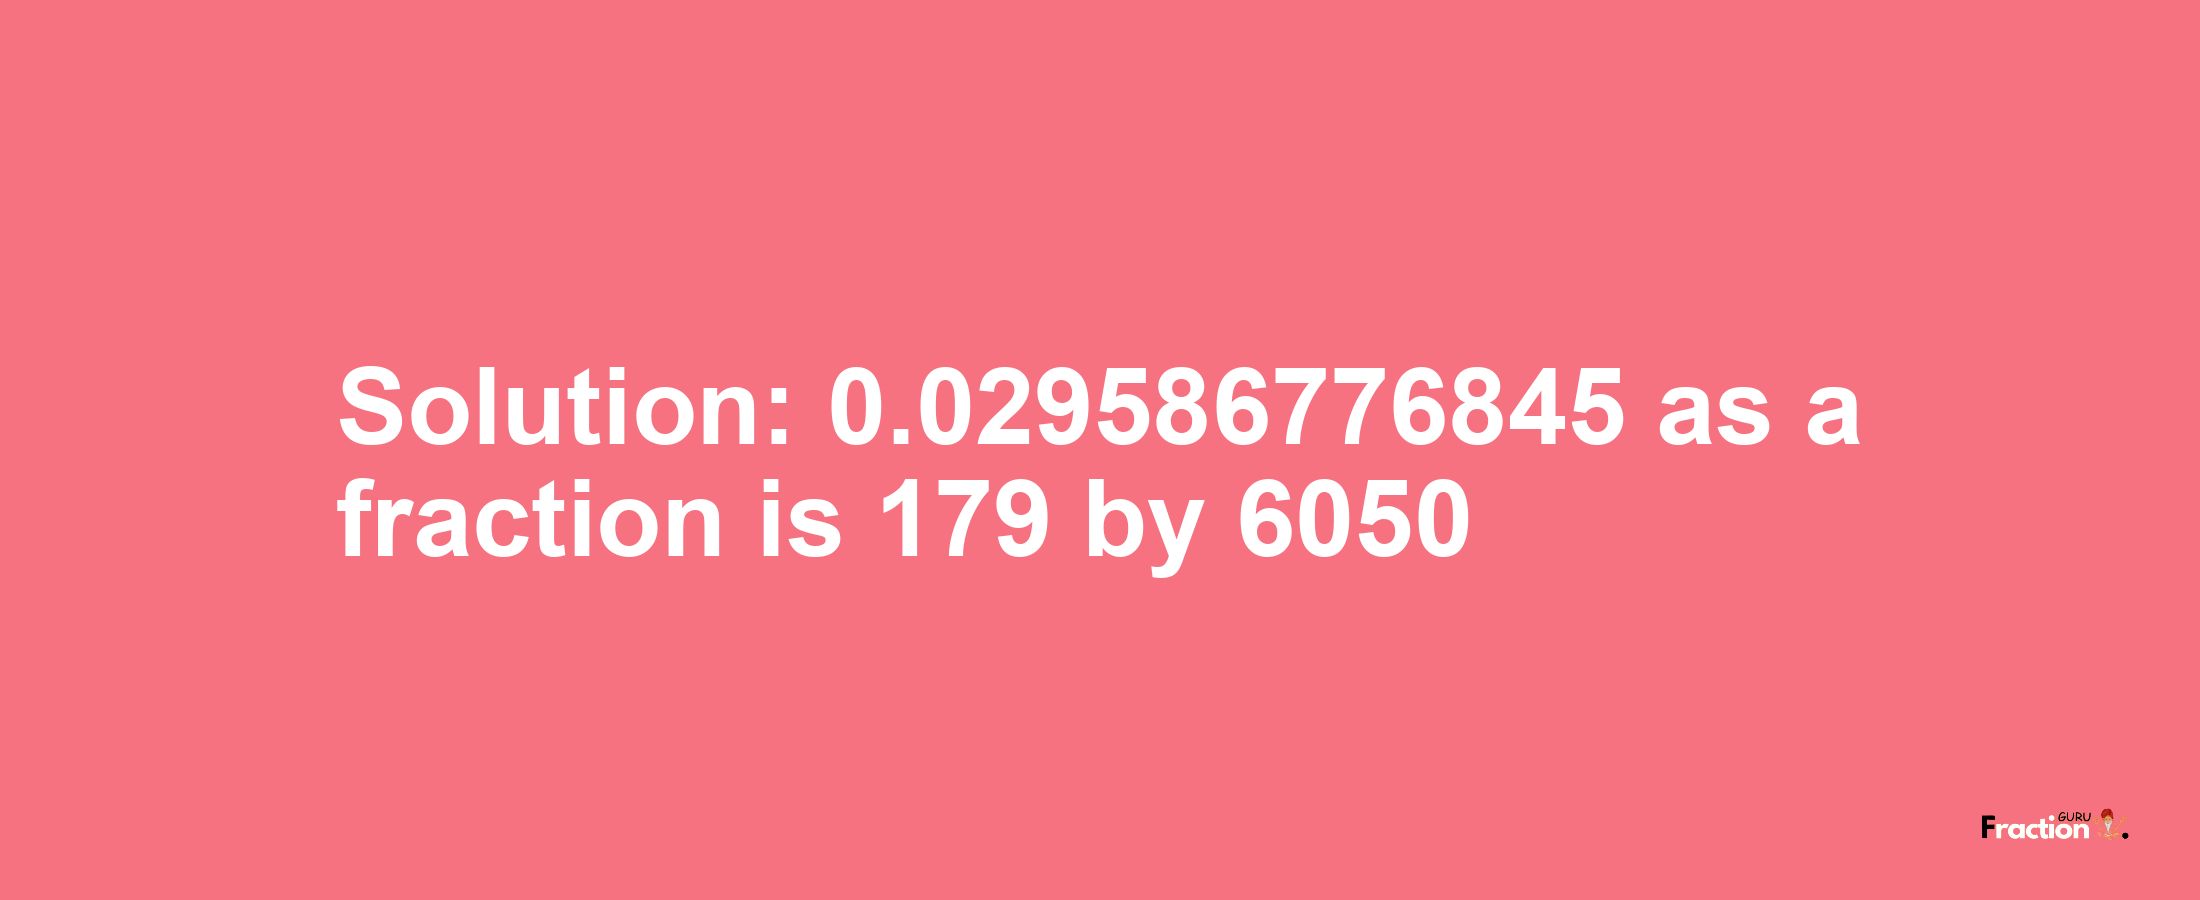 Solution:0.029586776845 as a fraction is 179/6050